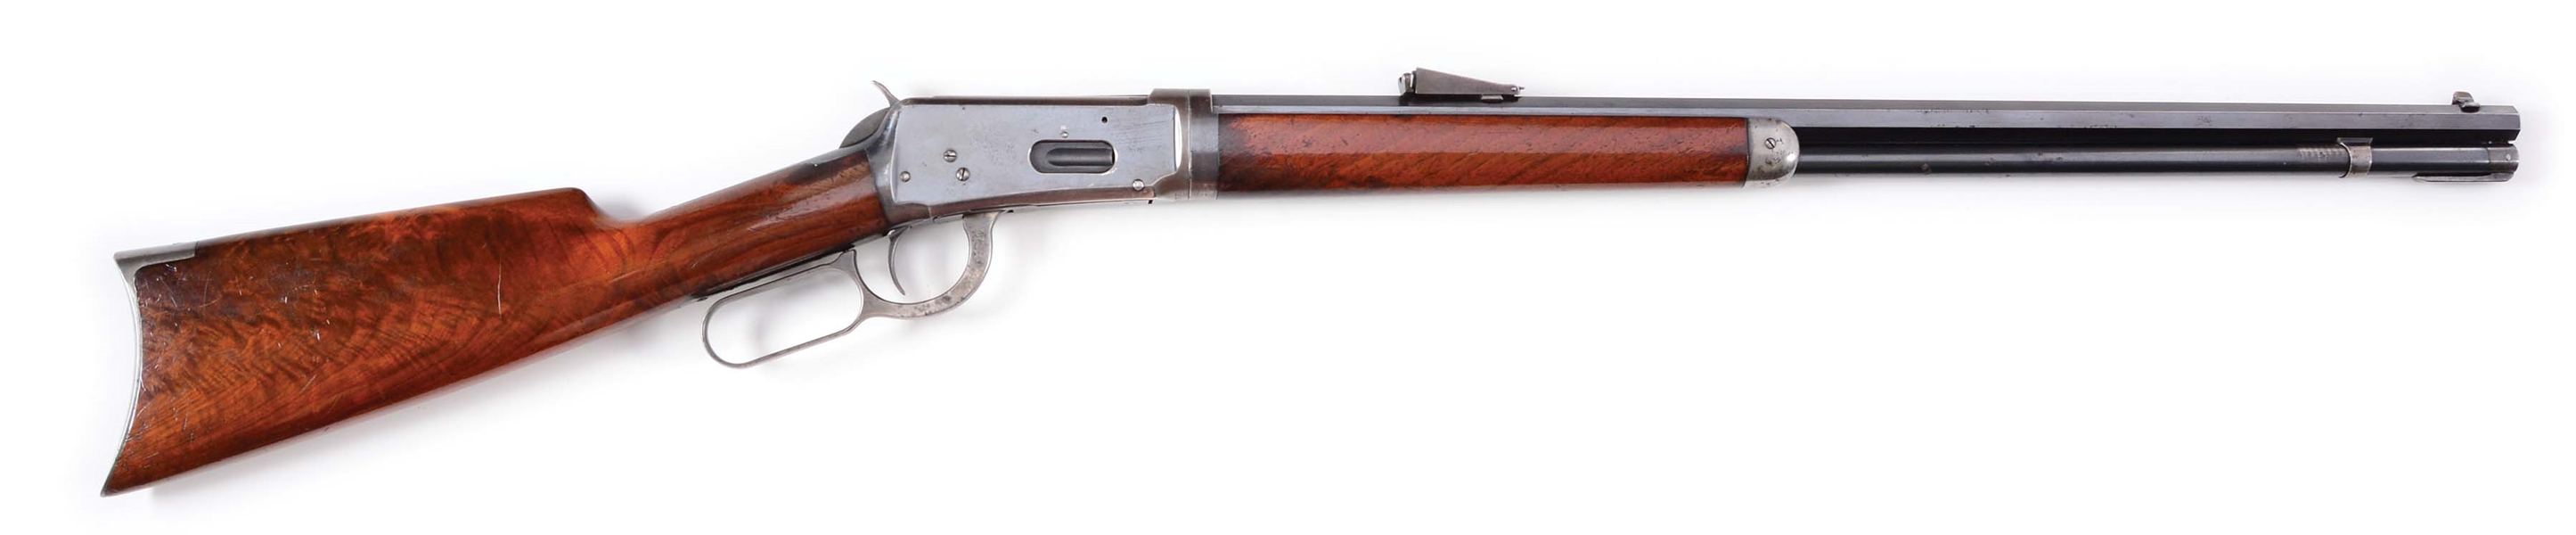 (C) PRESENTATION WINCHESTER MODEL 1894 TAKEDOWN LEVER ACTION RIFLE (1905).